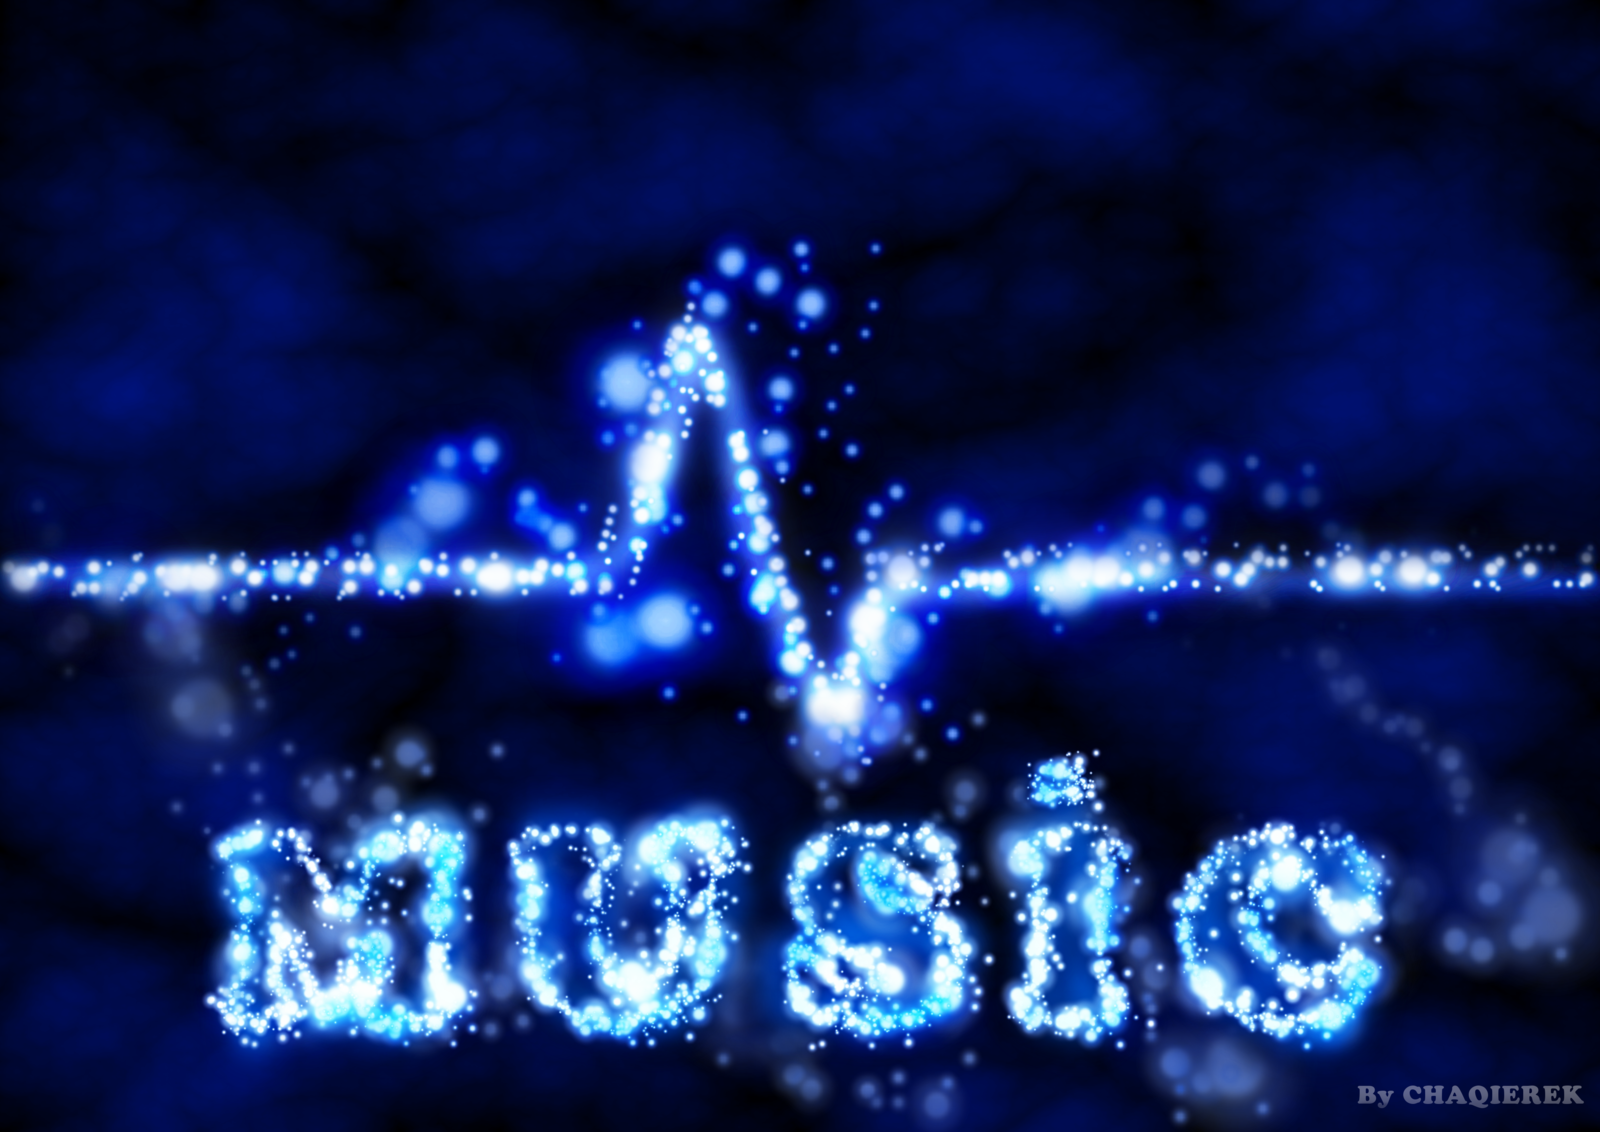 Music Is Life Wallpapers